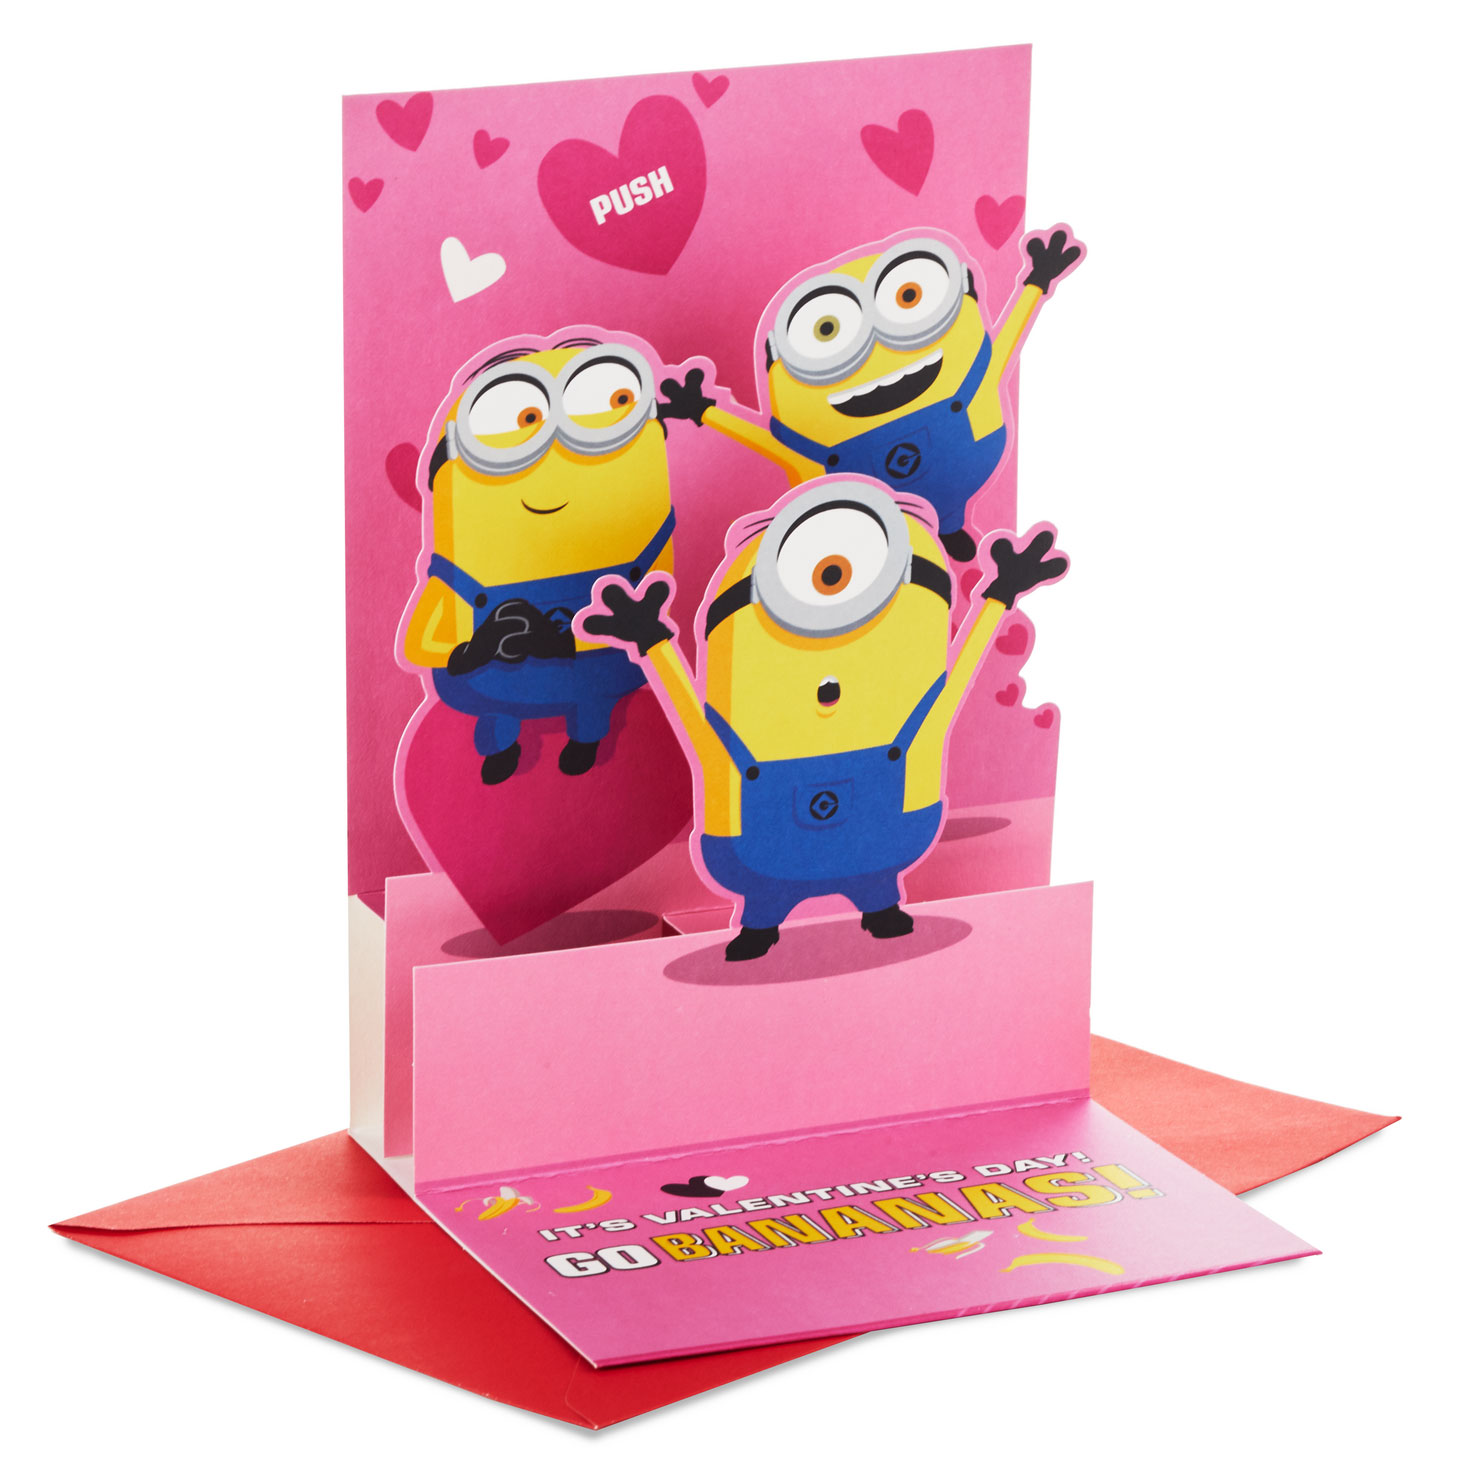 https://www.hallmark.com/on/demandware.static/-/Sites-hallmark-master/default/dwf1aa11f7/images/finished-goods/products/859VAY4967/Minions-Funny-Valentines-Day-Card-With-Sound_859VAY4967_01.jpg